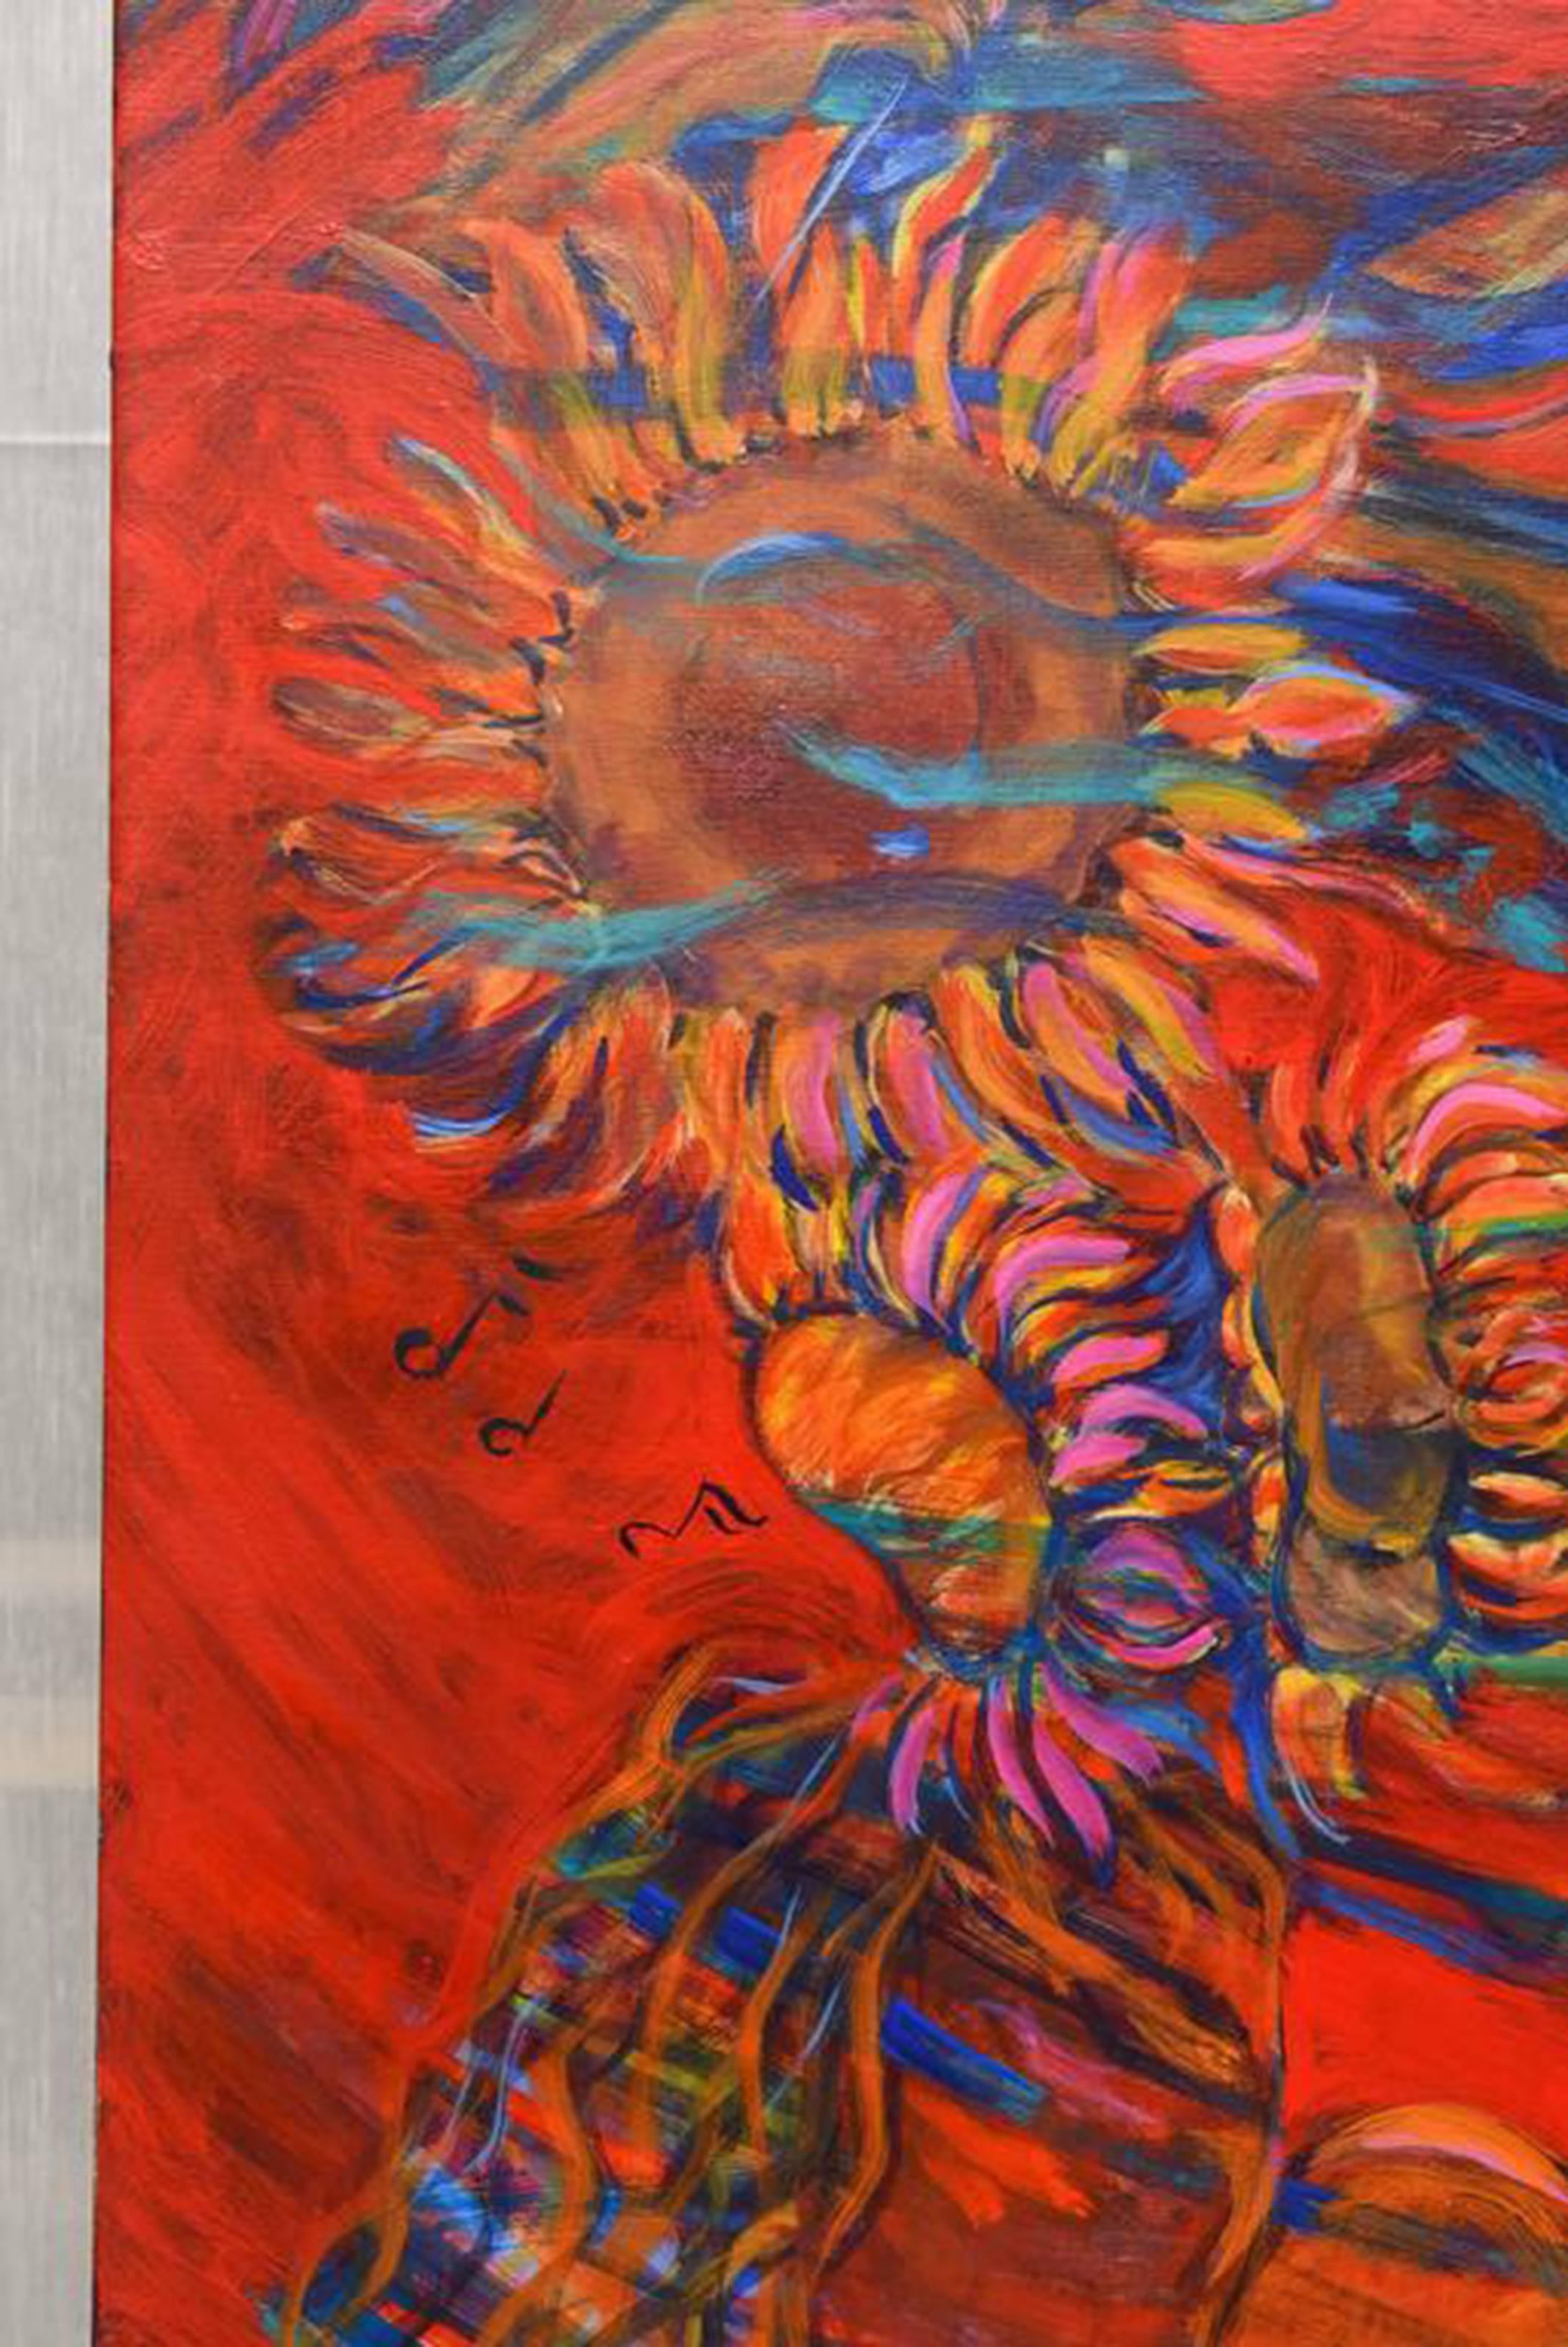 Swirling is a painting made by Evelyne Ballestra, a French contemporary artist. This piece is a part of a flower series, defined by their distinct bright colors, satiny, silky, vibrating materials and form. In this particular piece, the artist melt